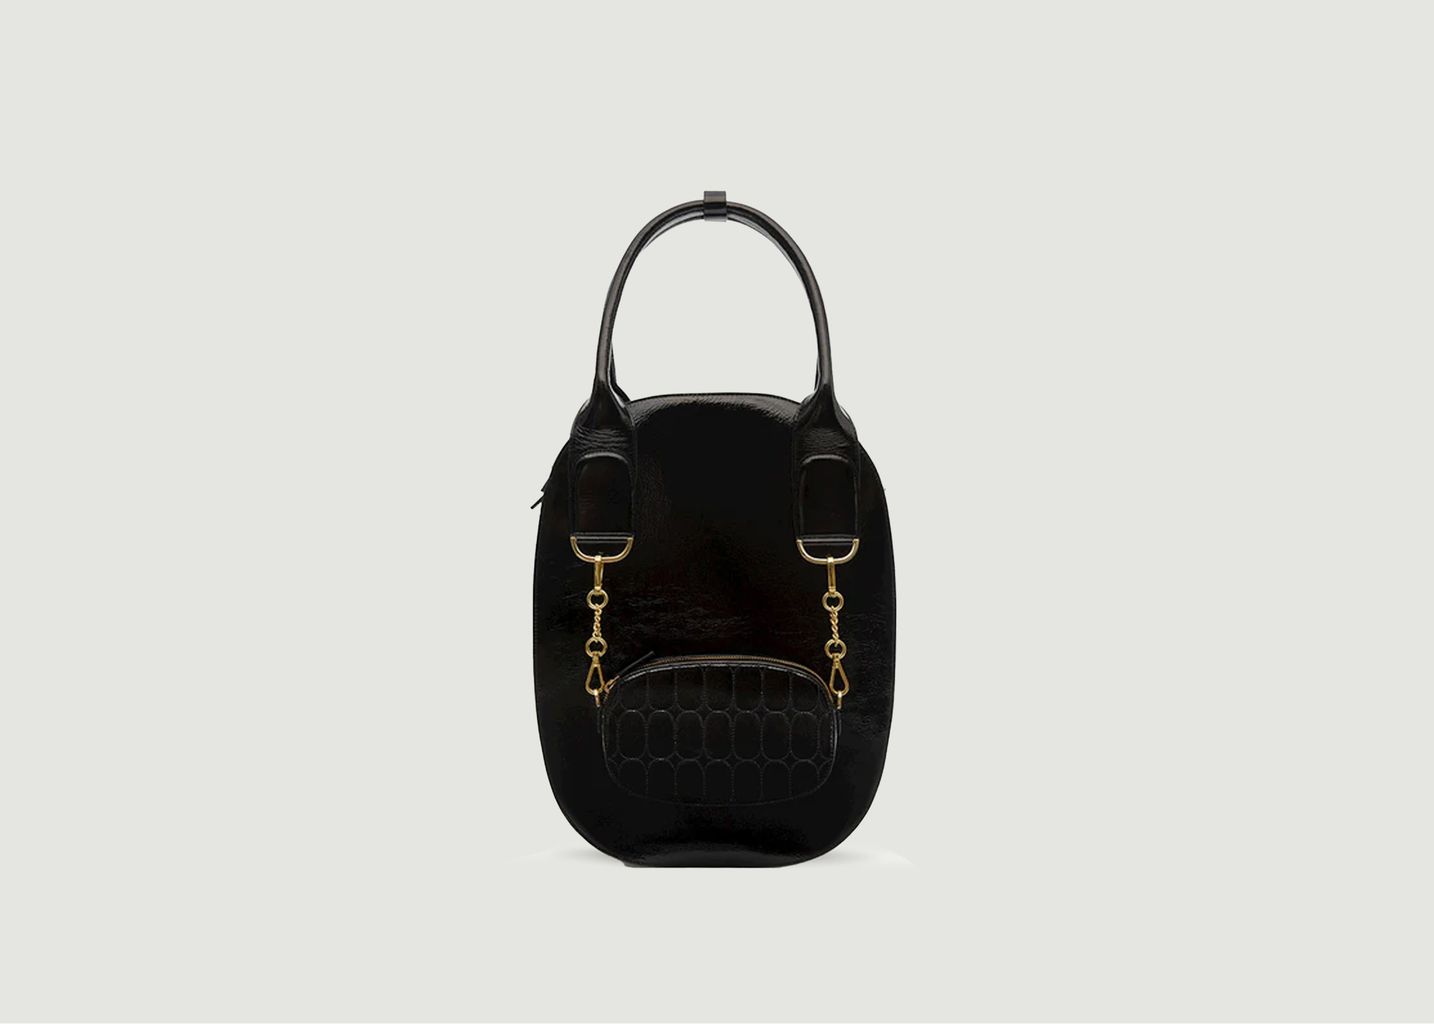 Roomy Patent Leather Tote - Octogony